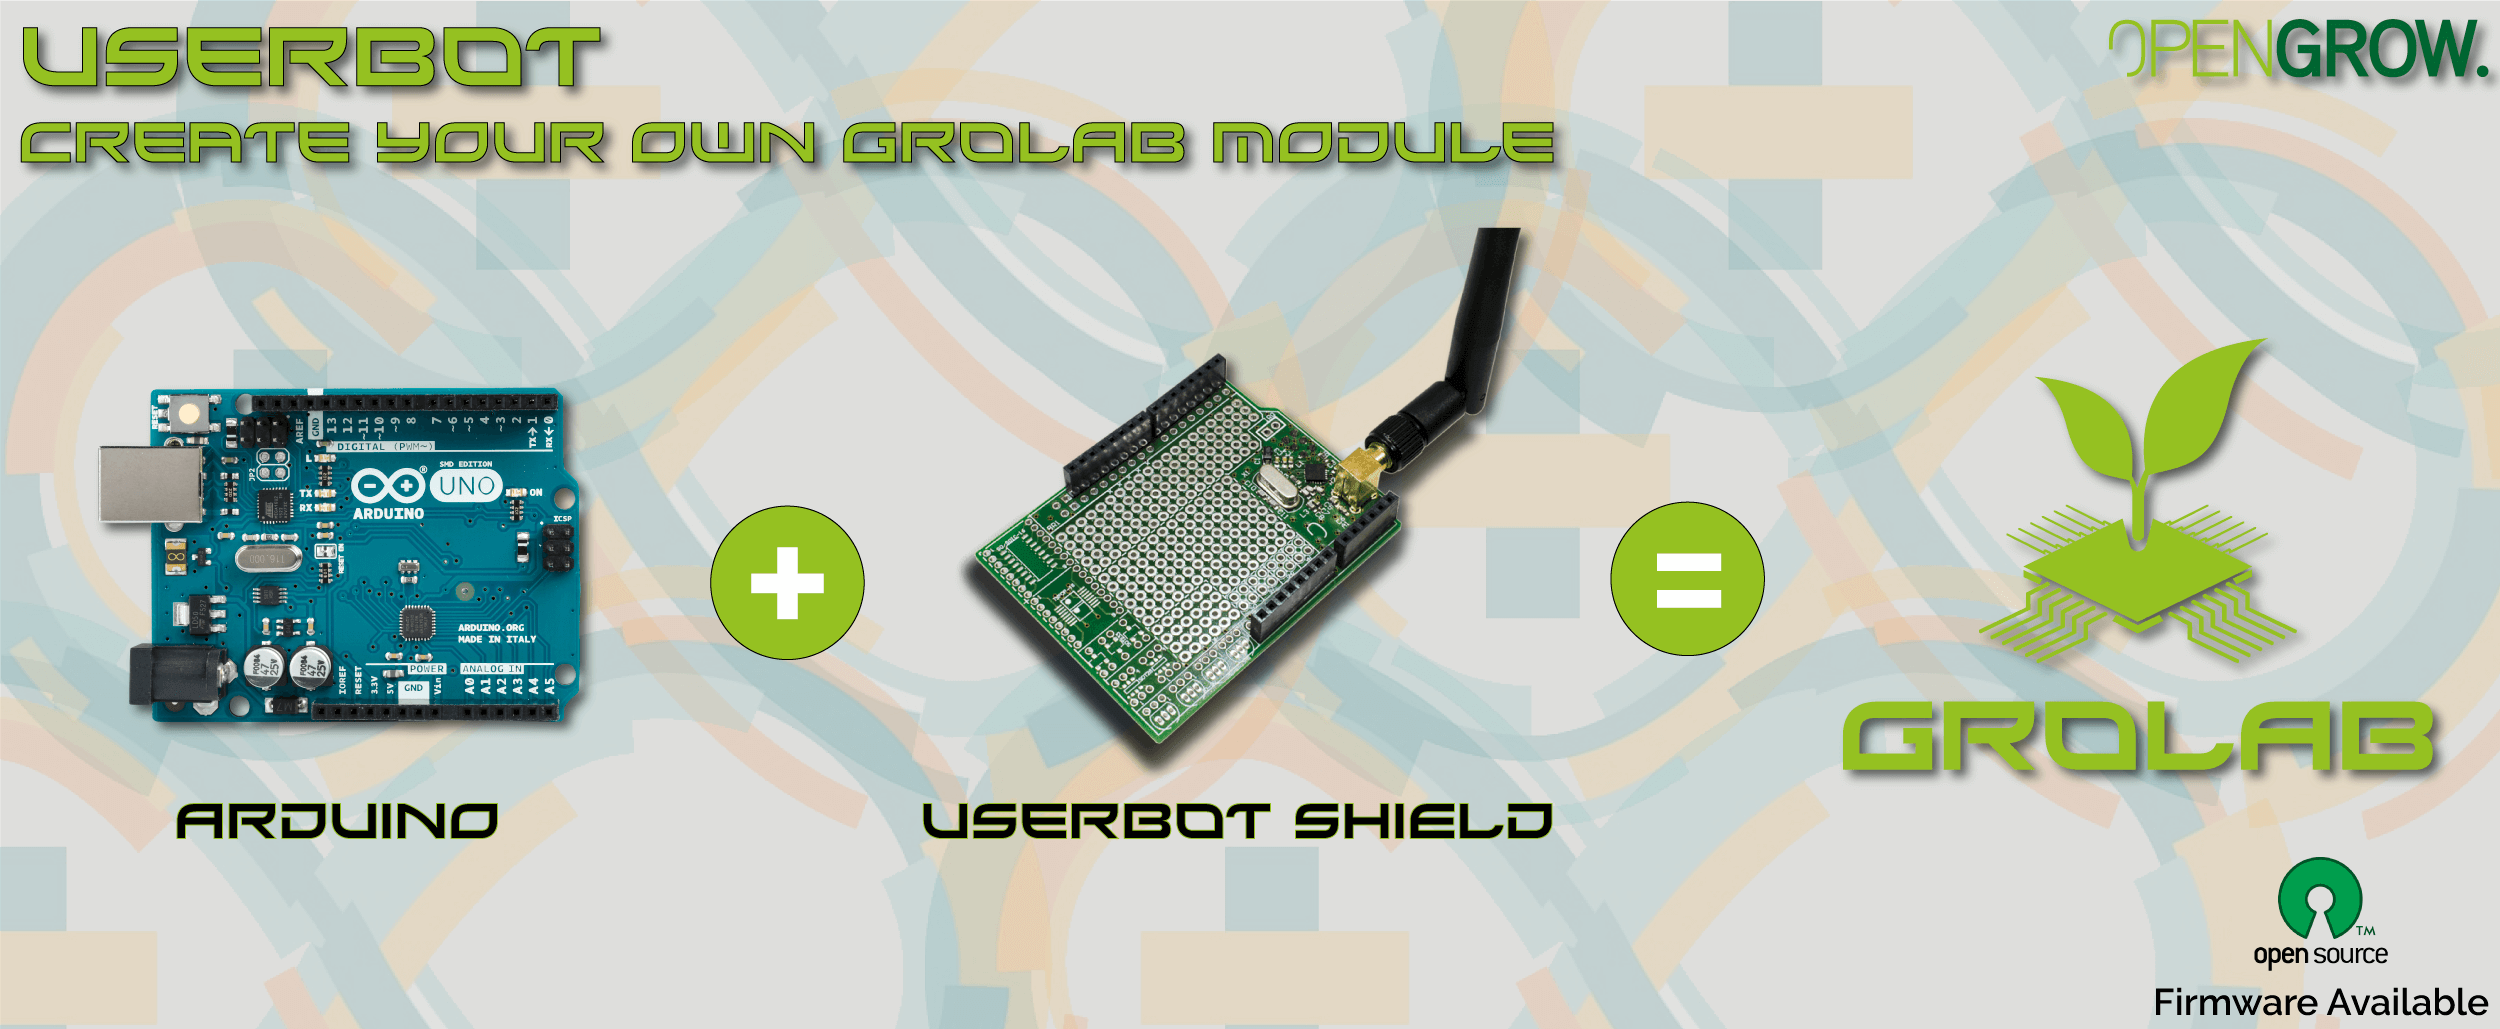 Creat your own GroLab module using our grow controller UserBot